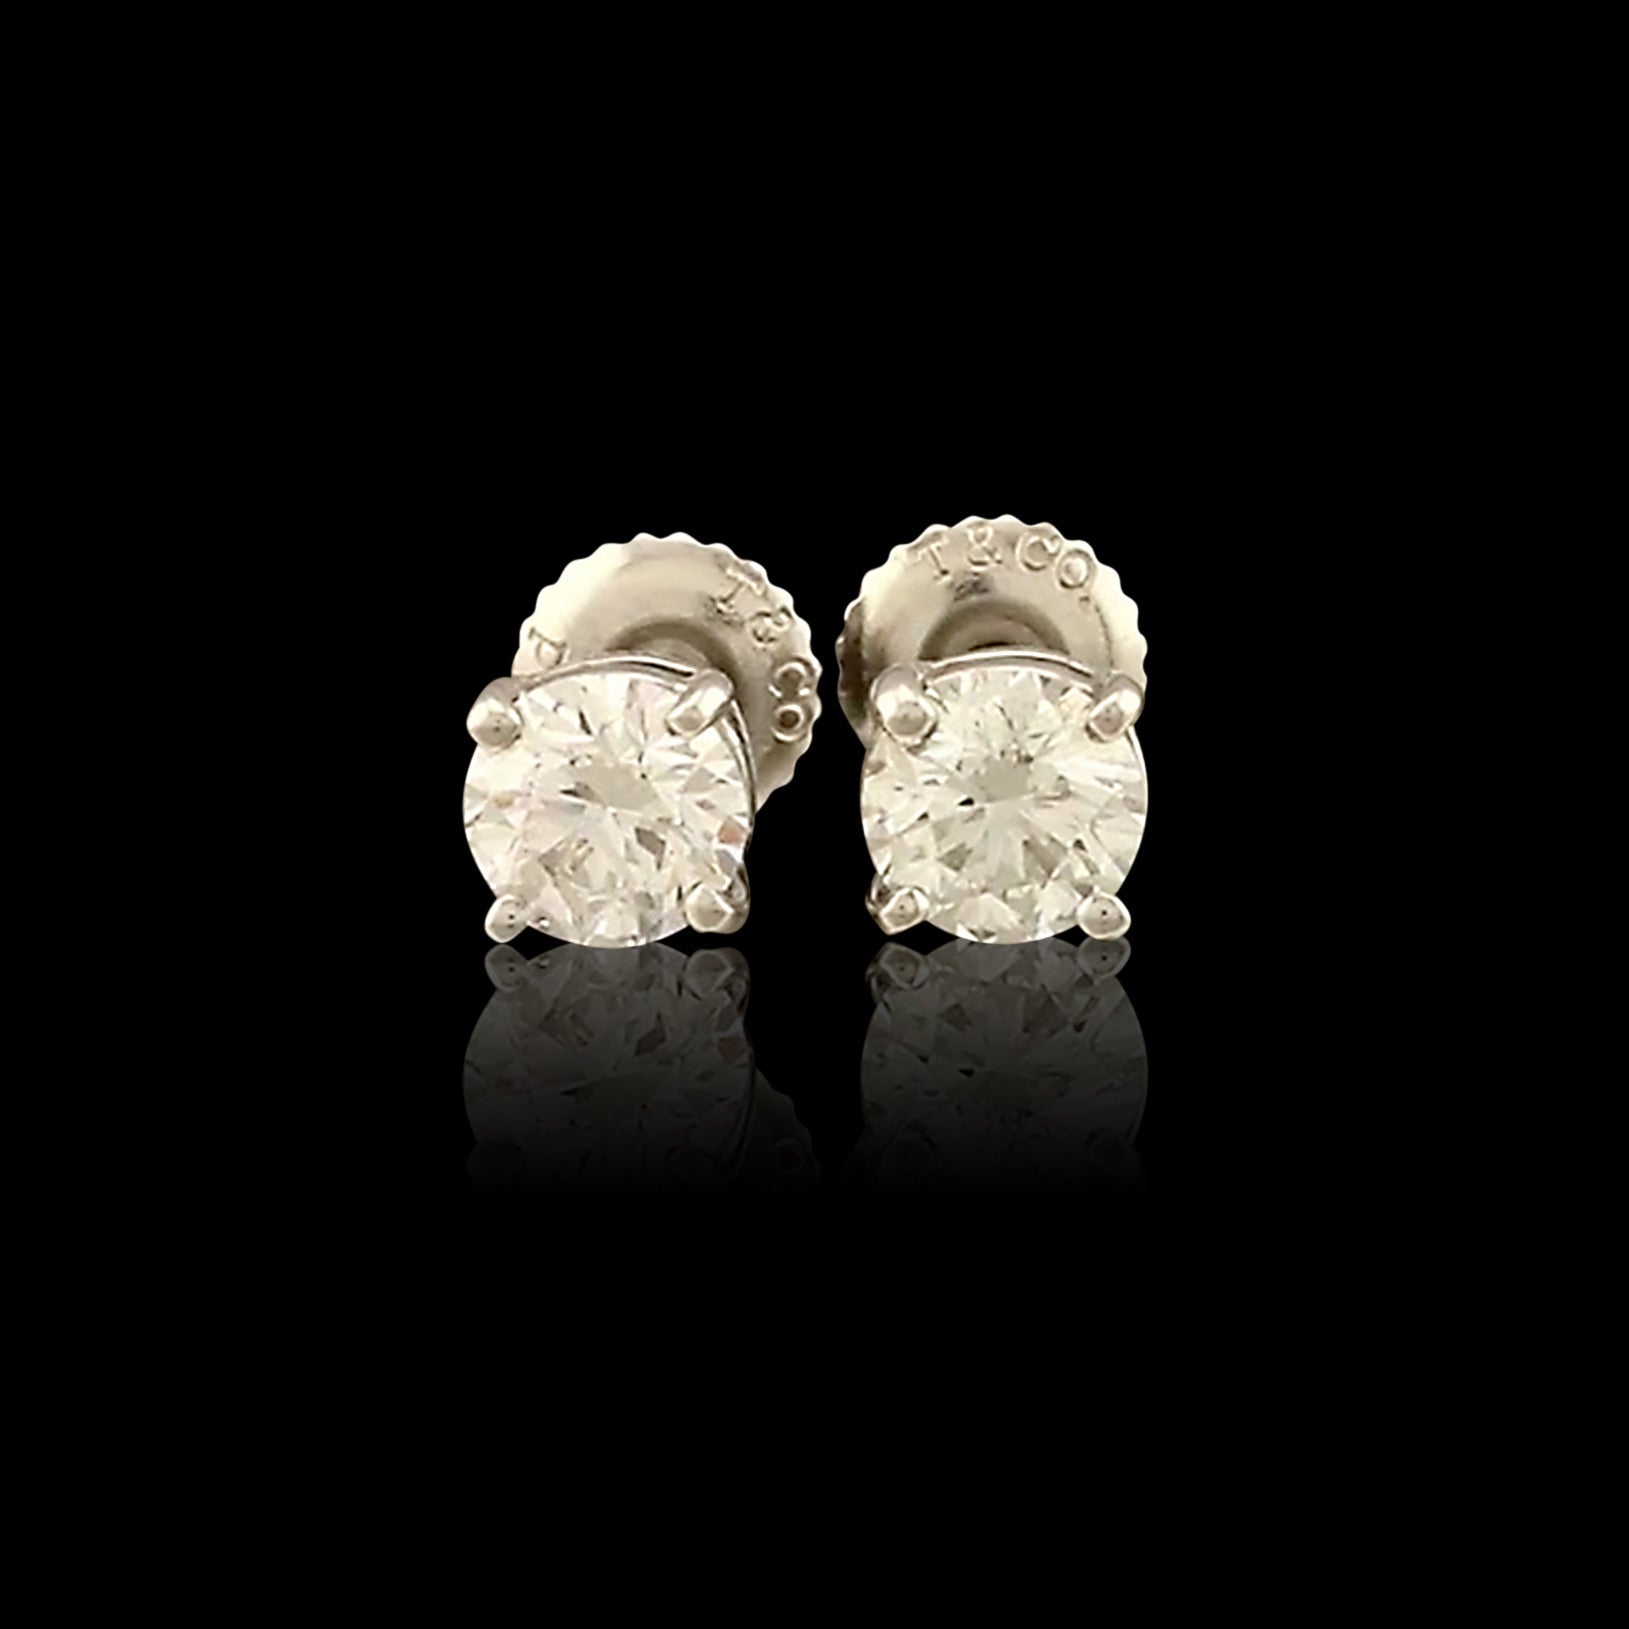 Tiffany & Co. Platinum And Diamond Stud Earrings Available For Immediate  Sale At Sotheby's